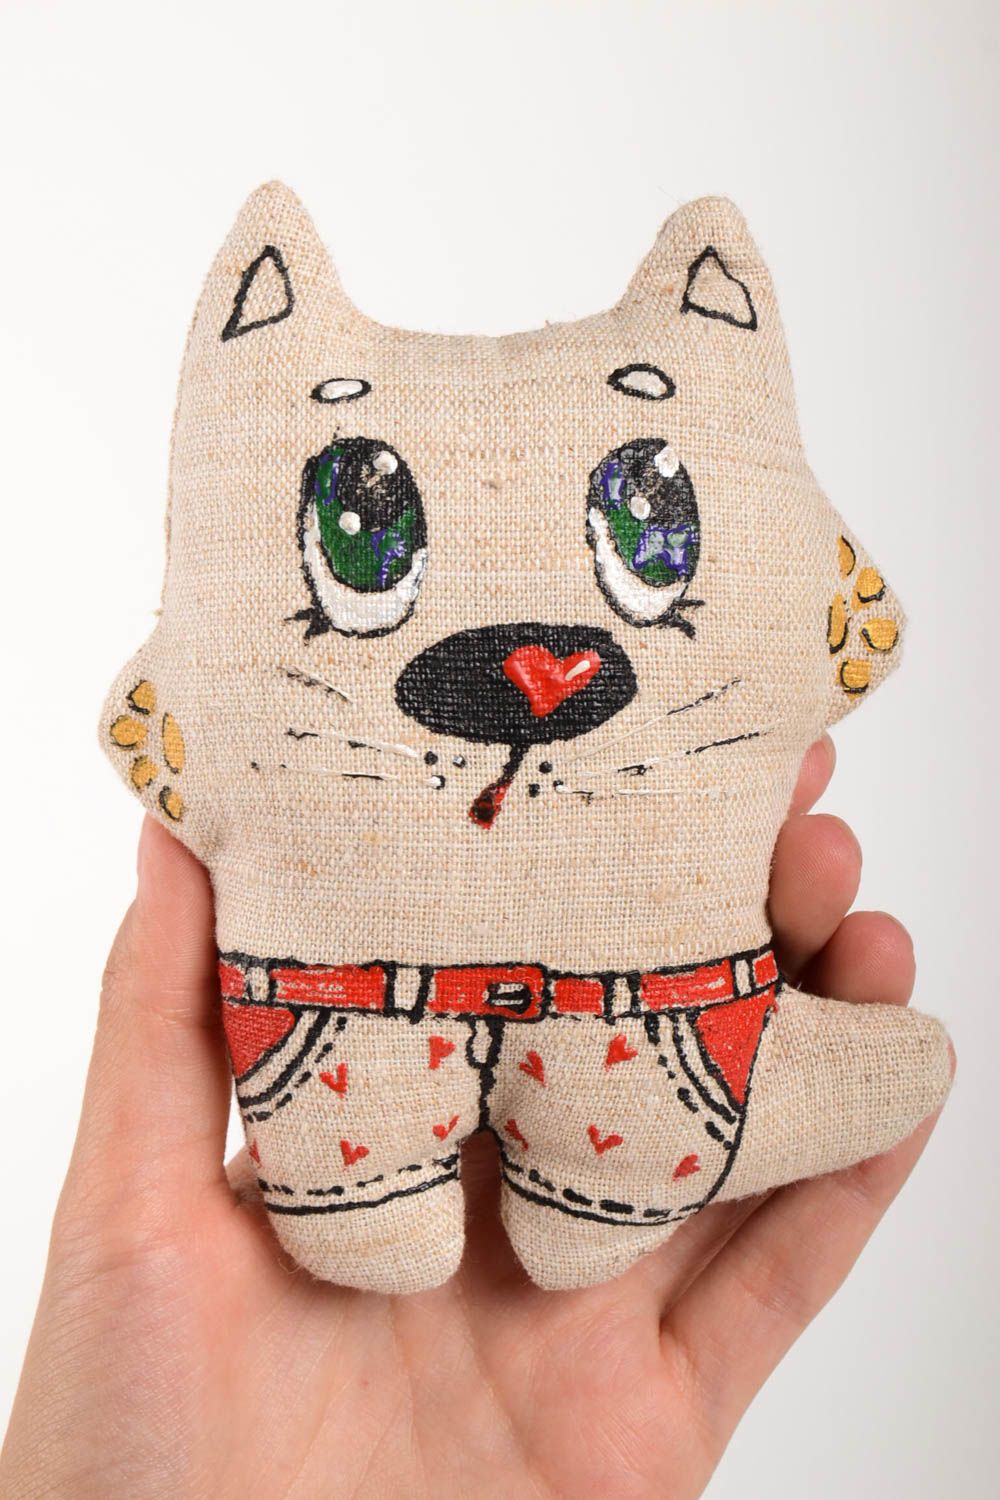 Handmade soft toy cat toy stuffed animals gifts for kids interior decorations photo 3